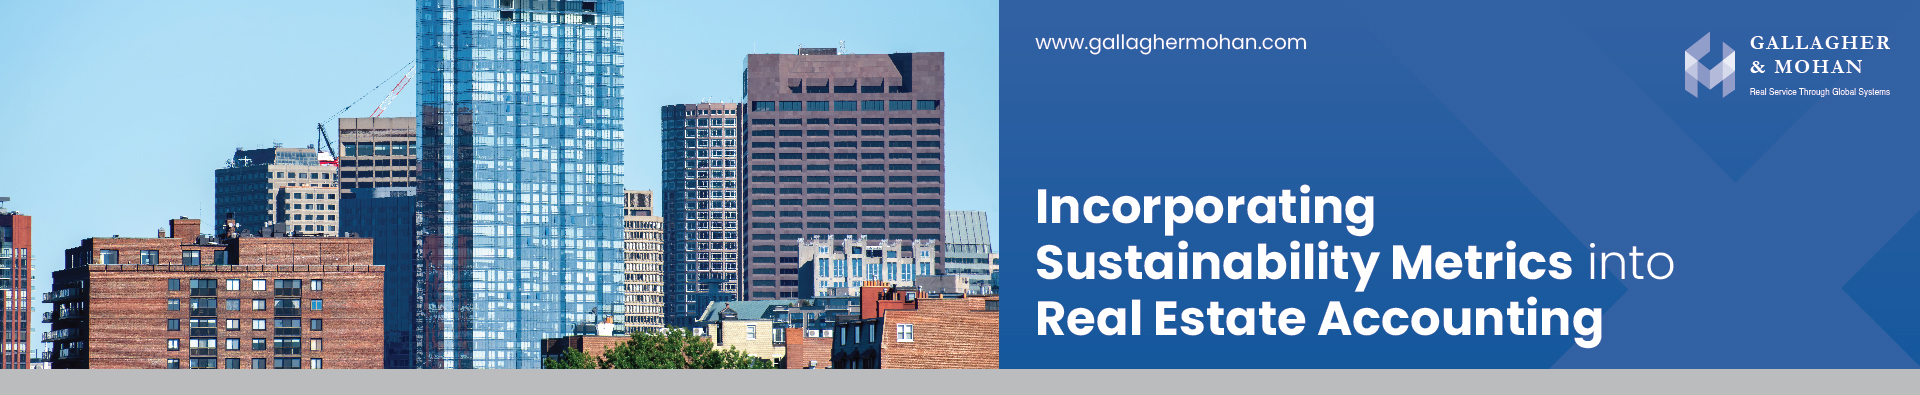 Incorporating Sustainability Metrics Into Real Estate Accounting